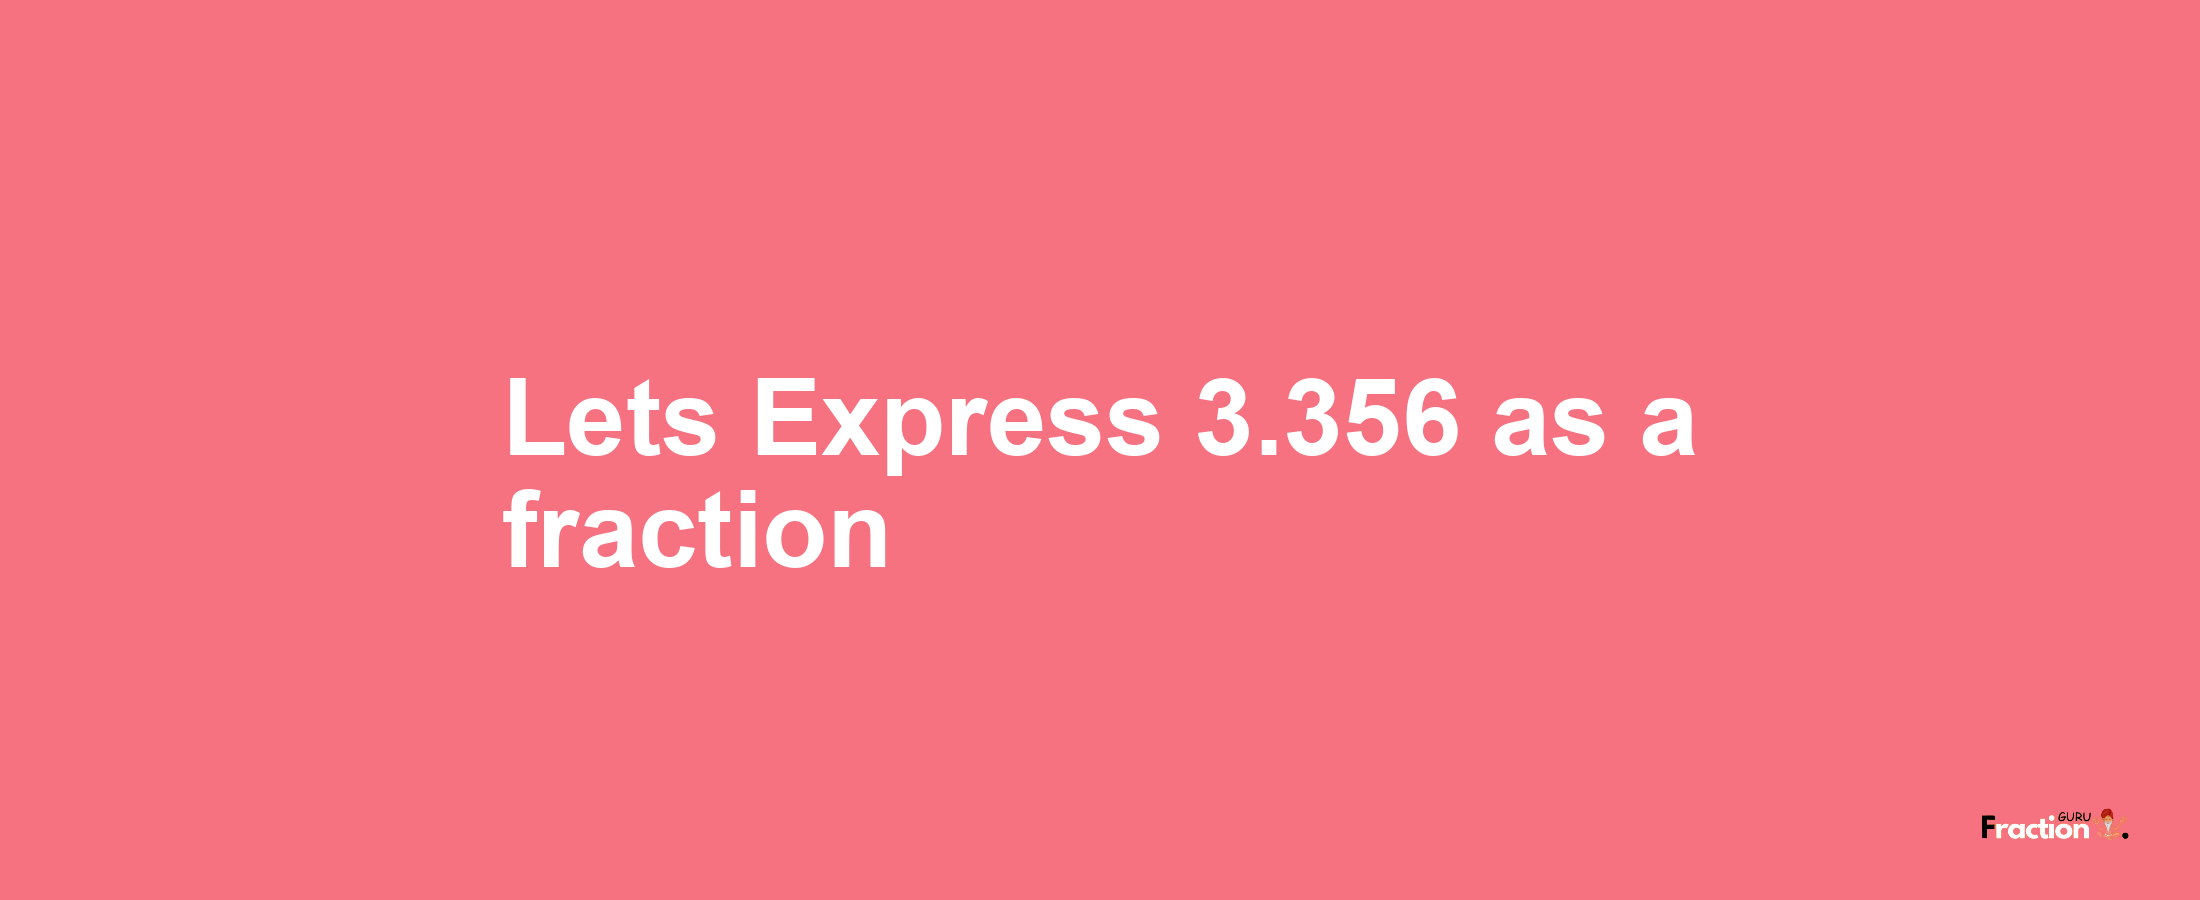 Lets Express 3.356 as afraction